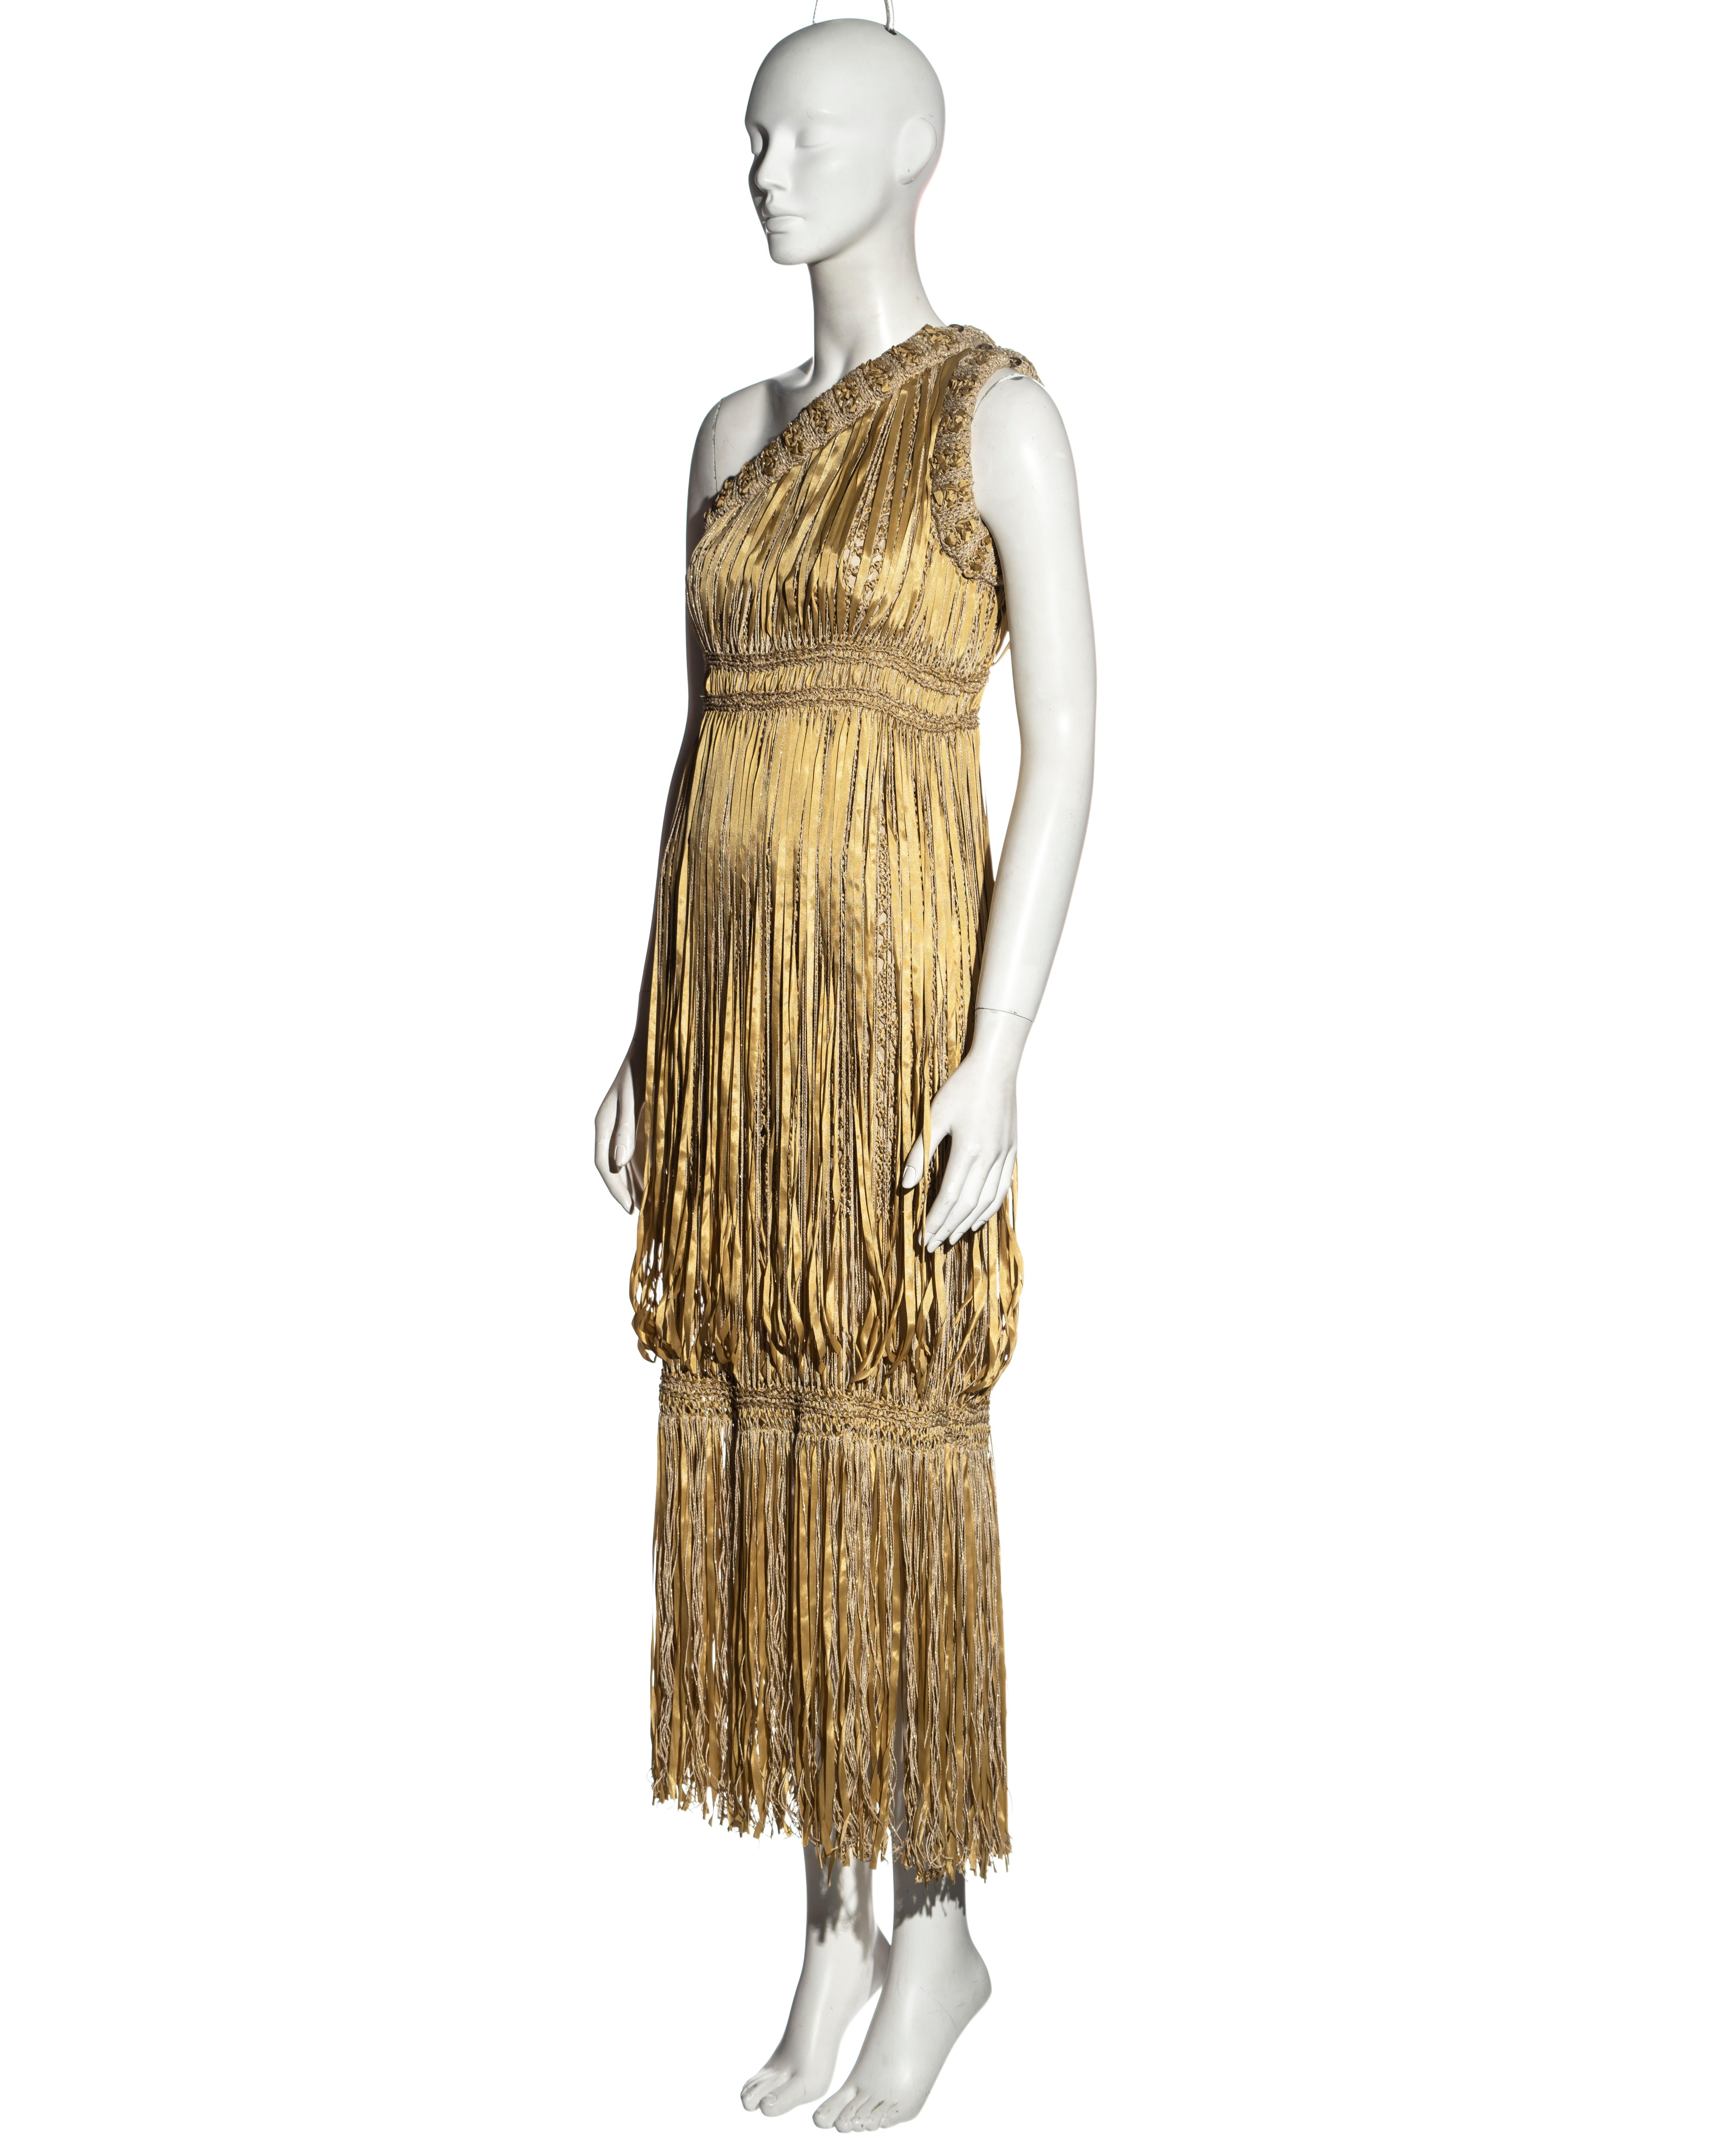 Women's Chanel by Karl Lagerfeld straw crochet and ribbon one-shoulder dress, ss 2011